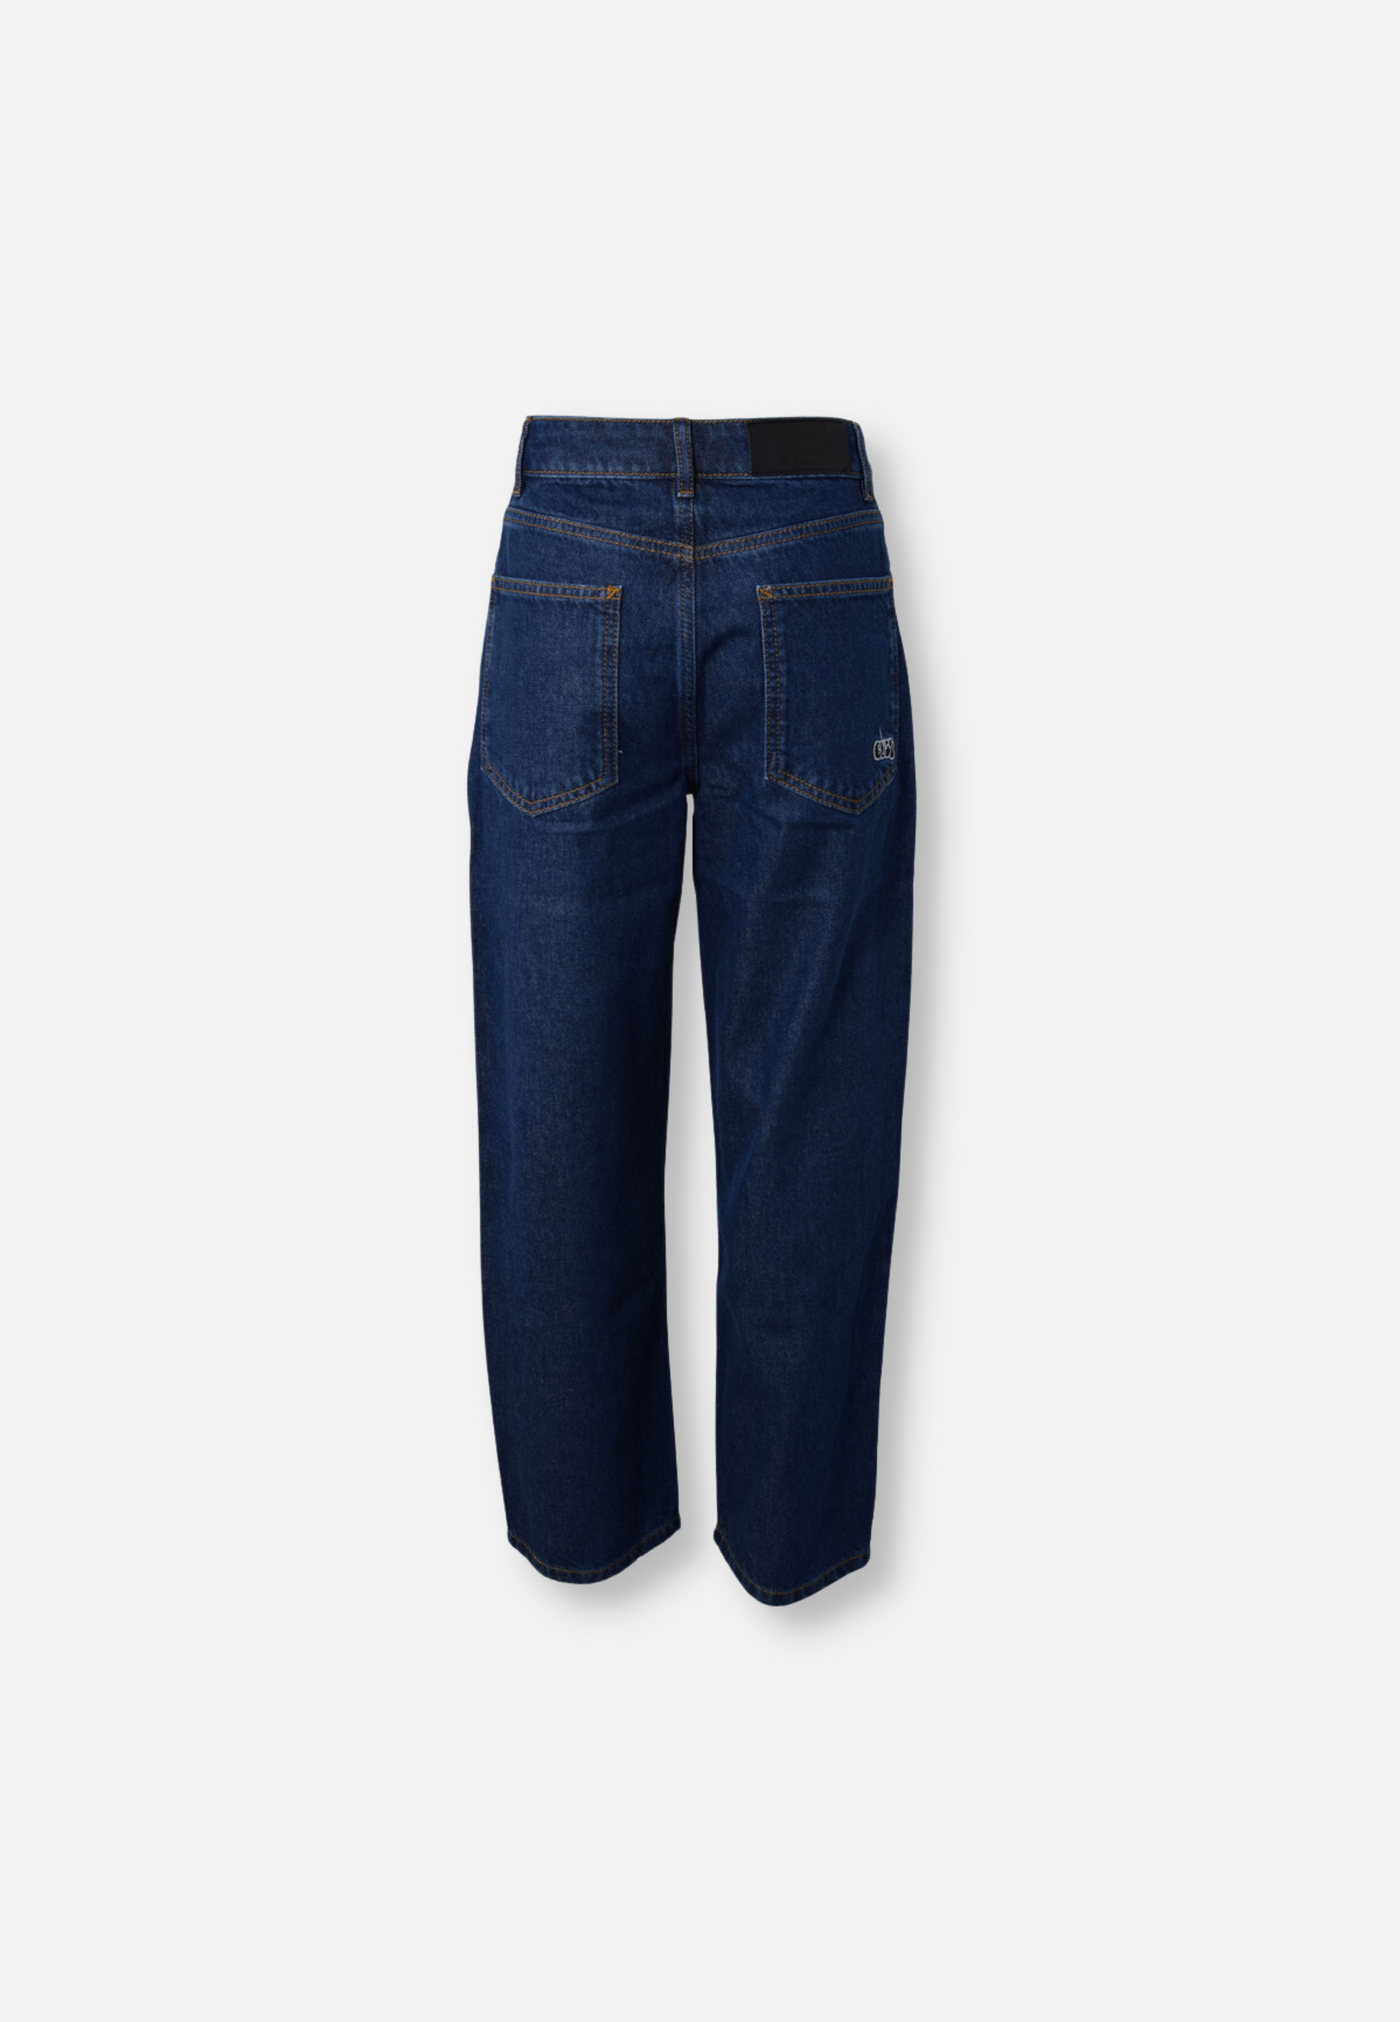 RELAXED FIT JEANS - DARK STONE WASH